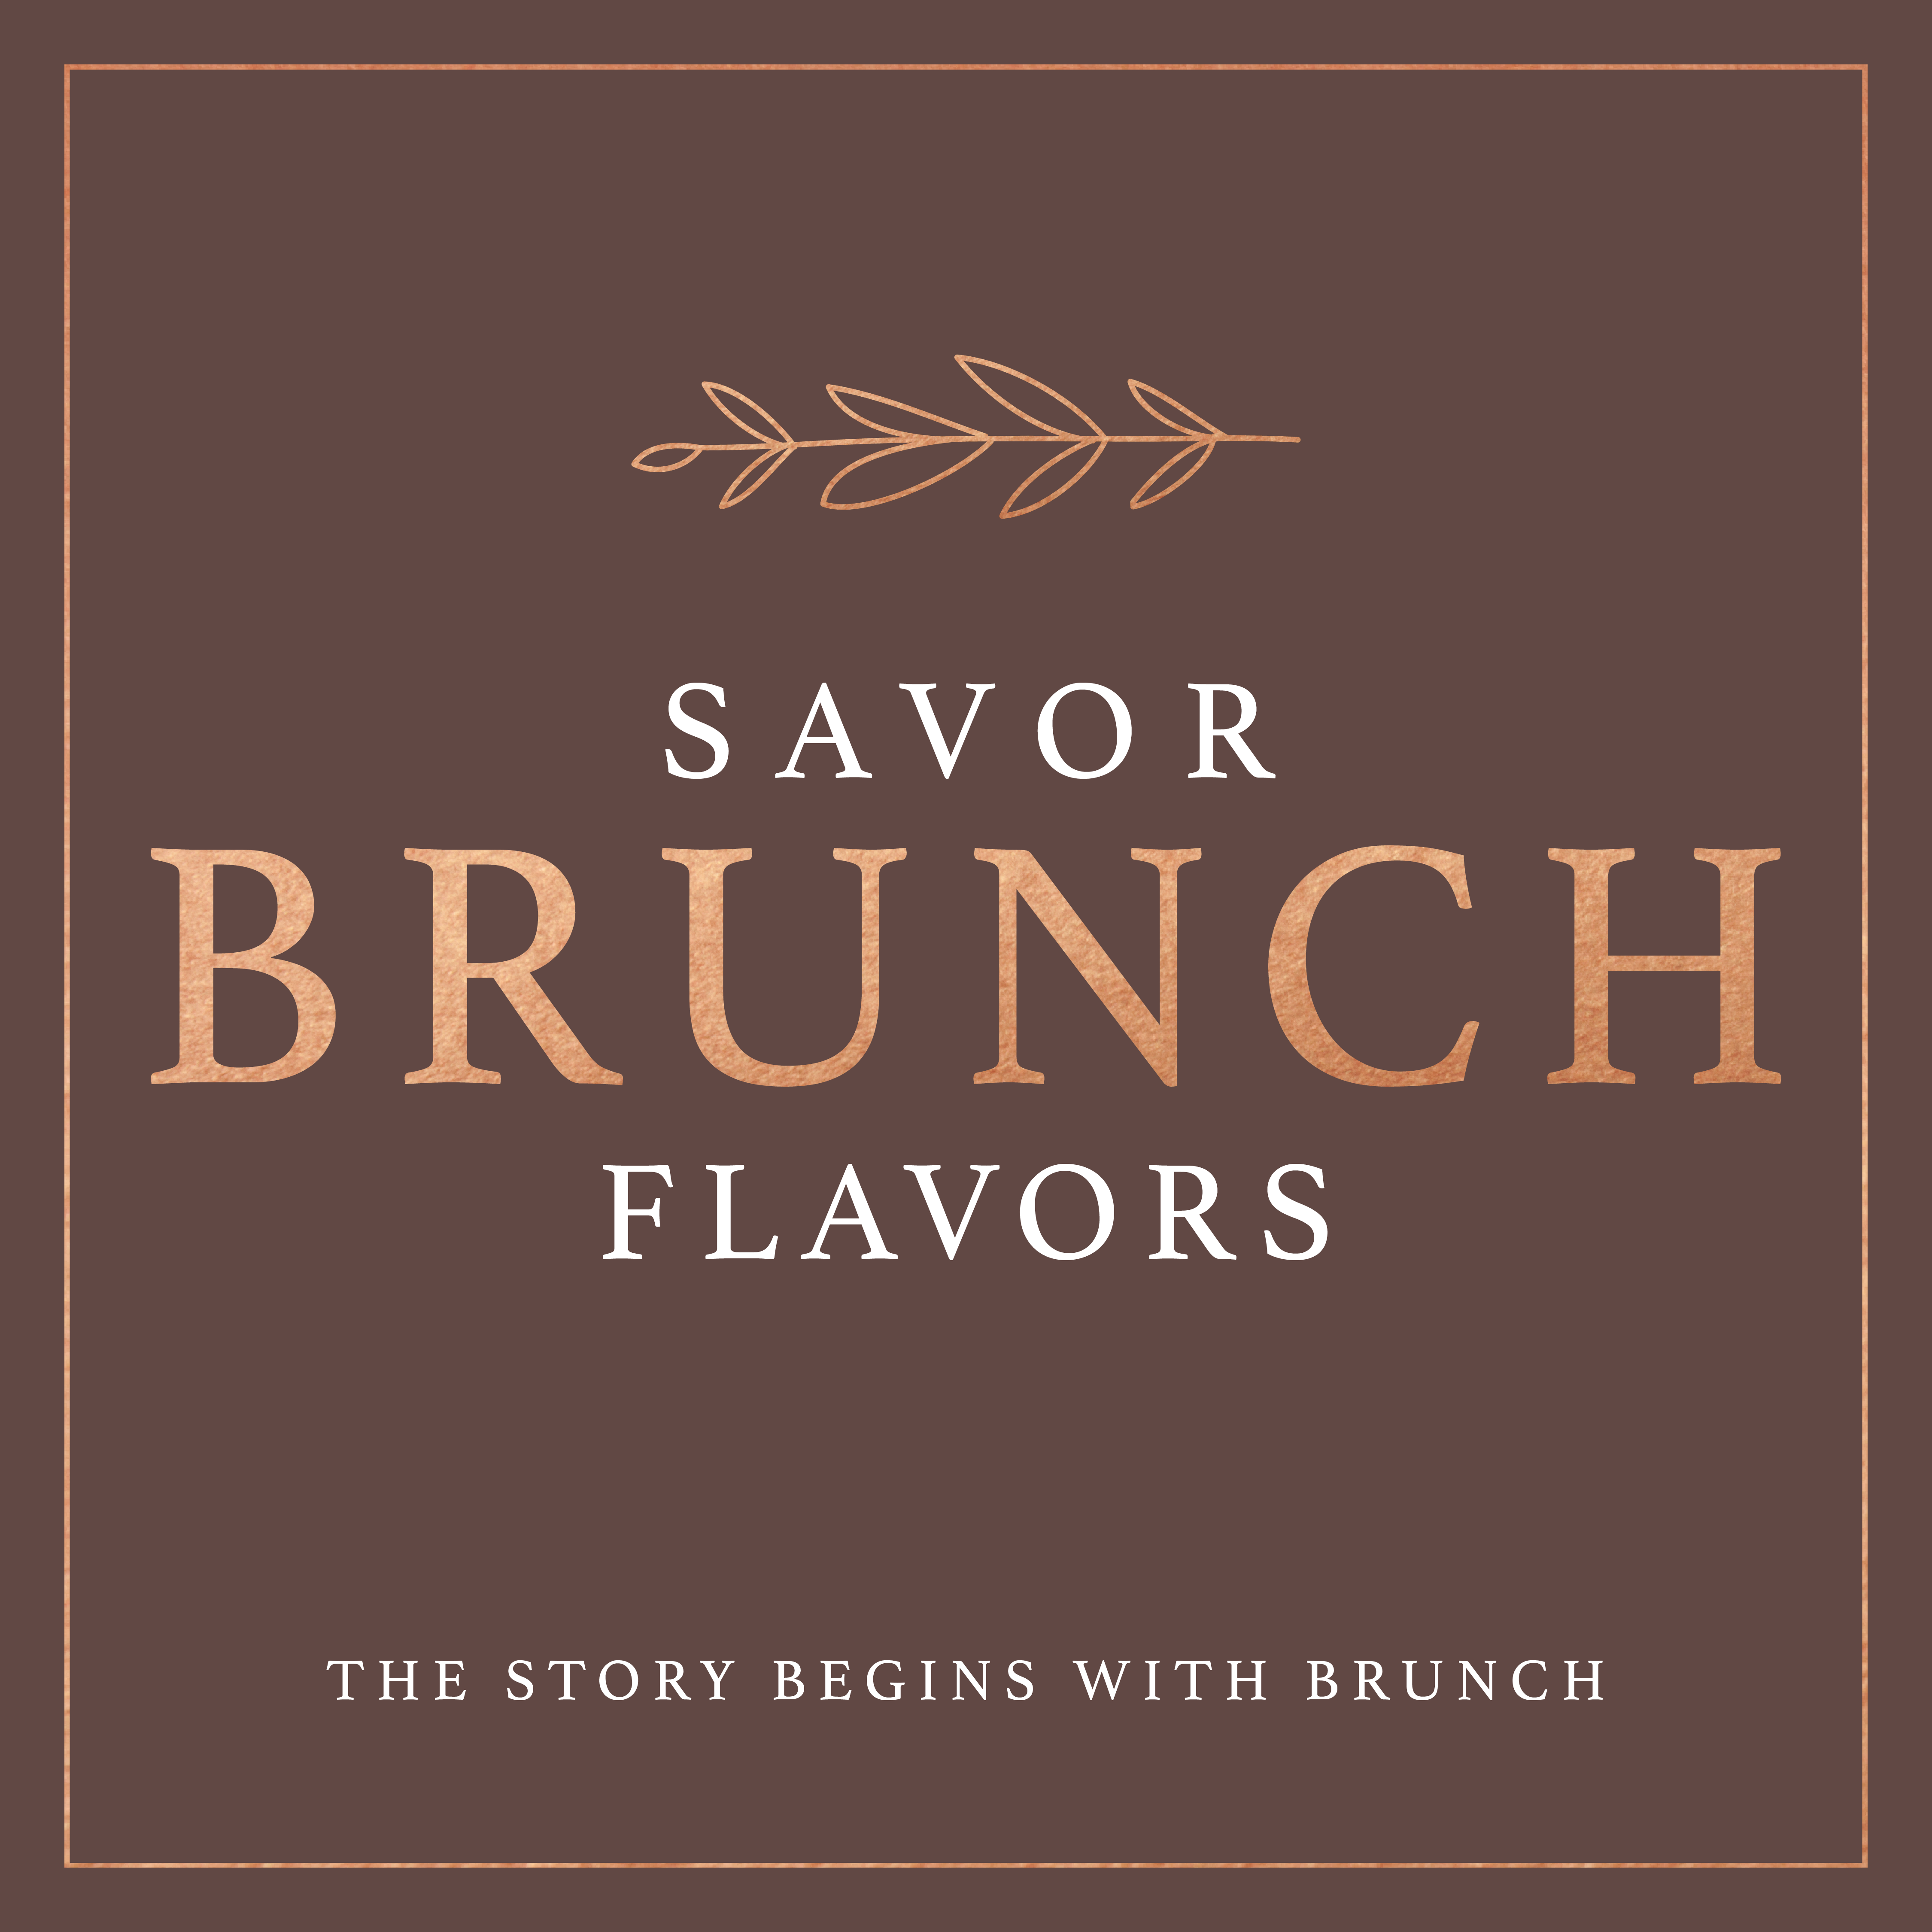 brunch event graphic that reads savor brunch flavors with brown background